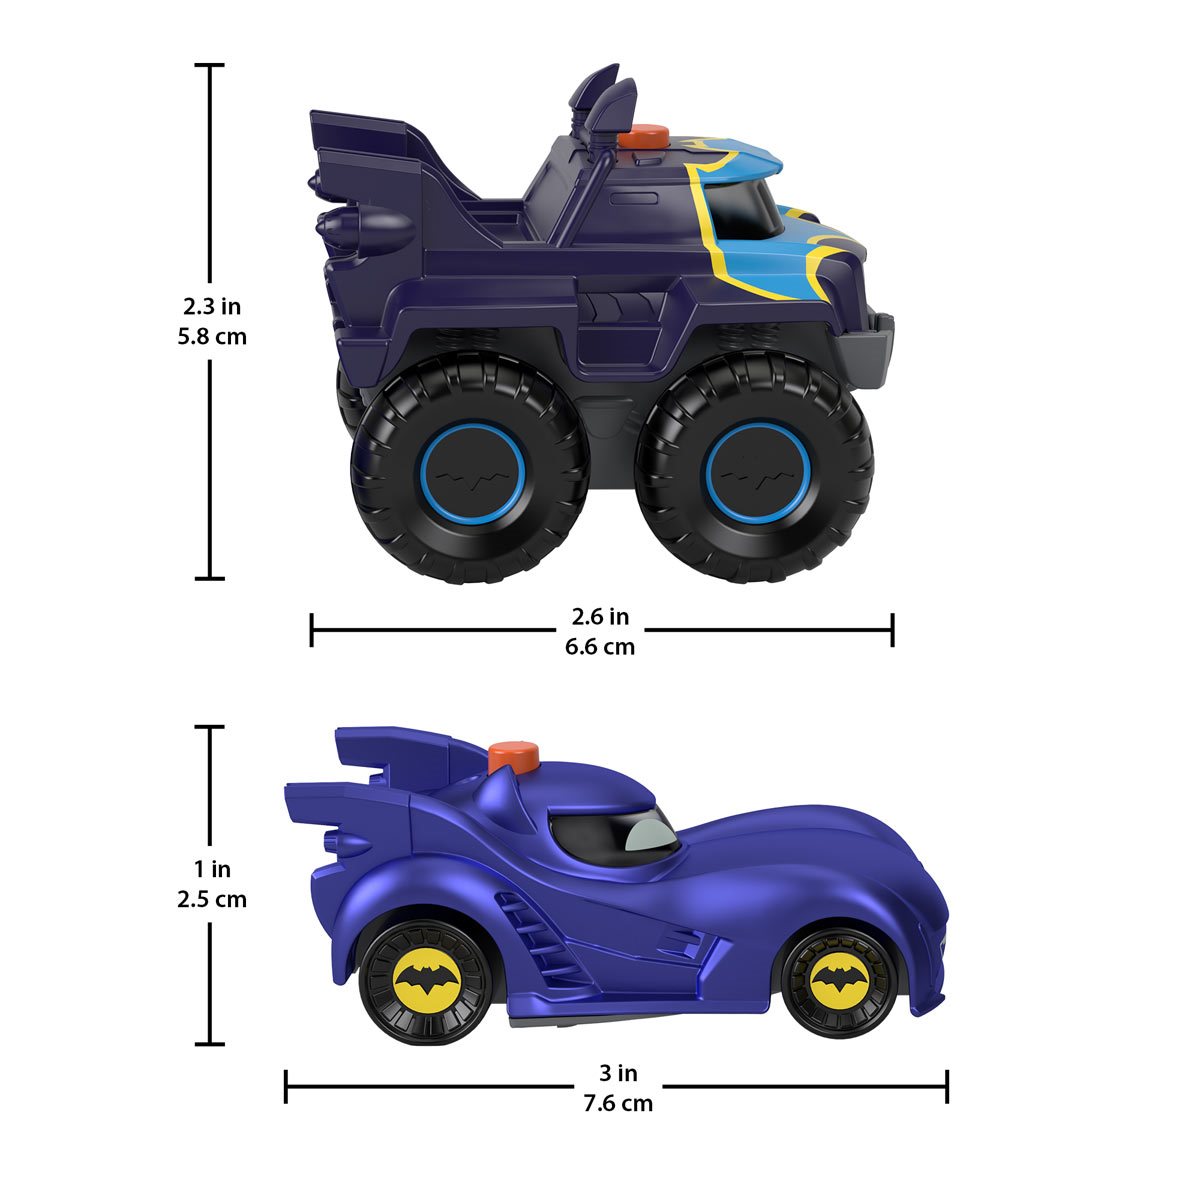 BATWHEELS BAM 3D VEHICLE DELUXE LIGHT-UP - The Toy Book